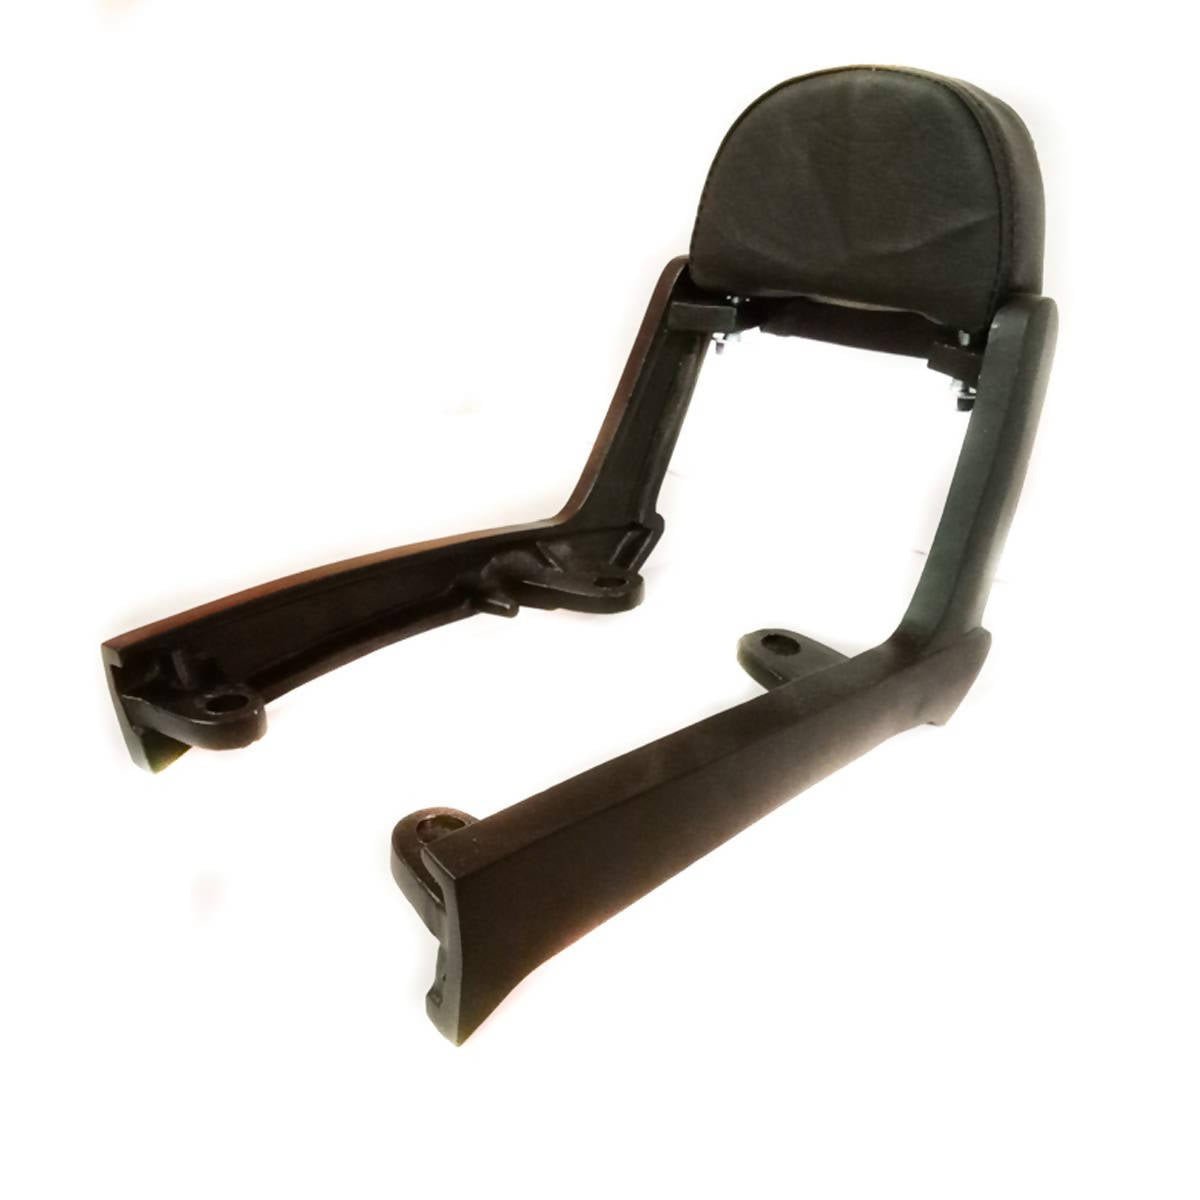 Spidy Moto Style Back Rest Support Pillion Black Cushion Only for Fit in Royal Enfield Thunderbird 350X, Thunderbird 500X